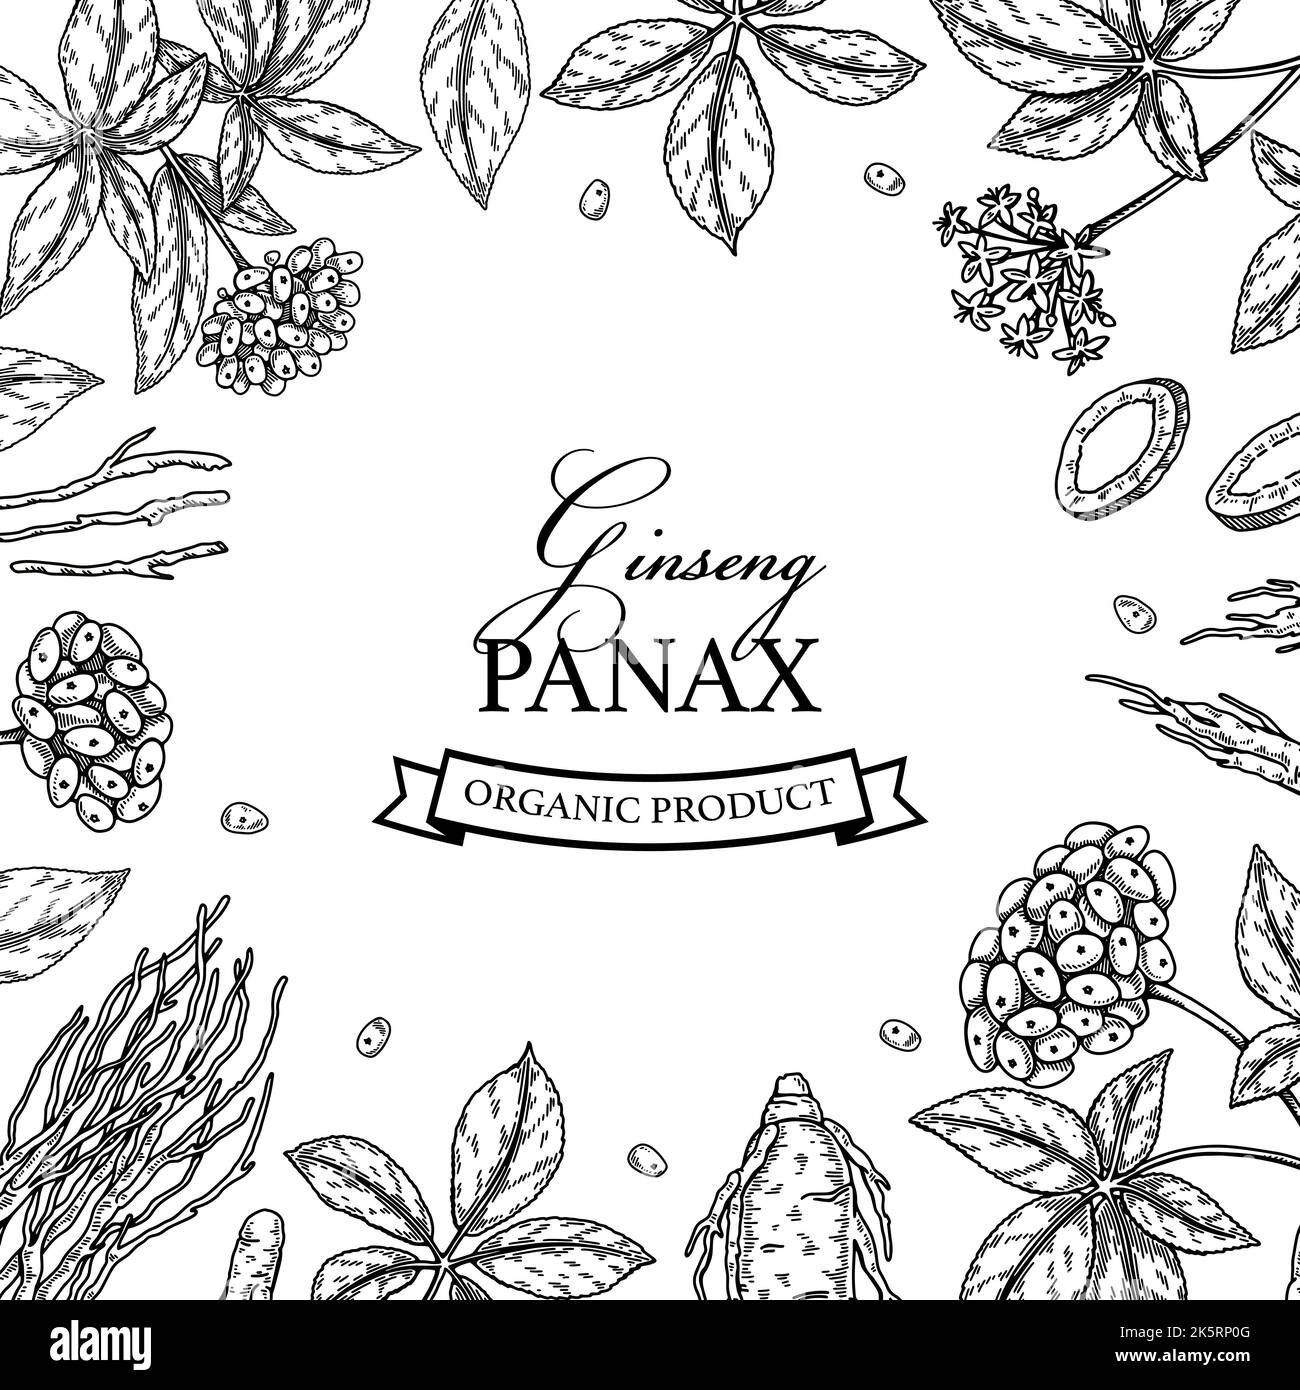 Ginseng square design. Hand drawn botanical vector illustration in sketch style. Can be used for packaging, label, badge. Herbal medicine background Stock Vector